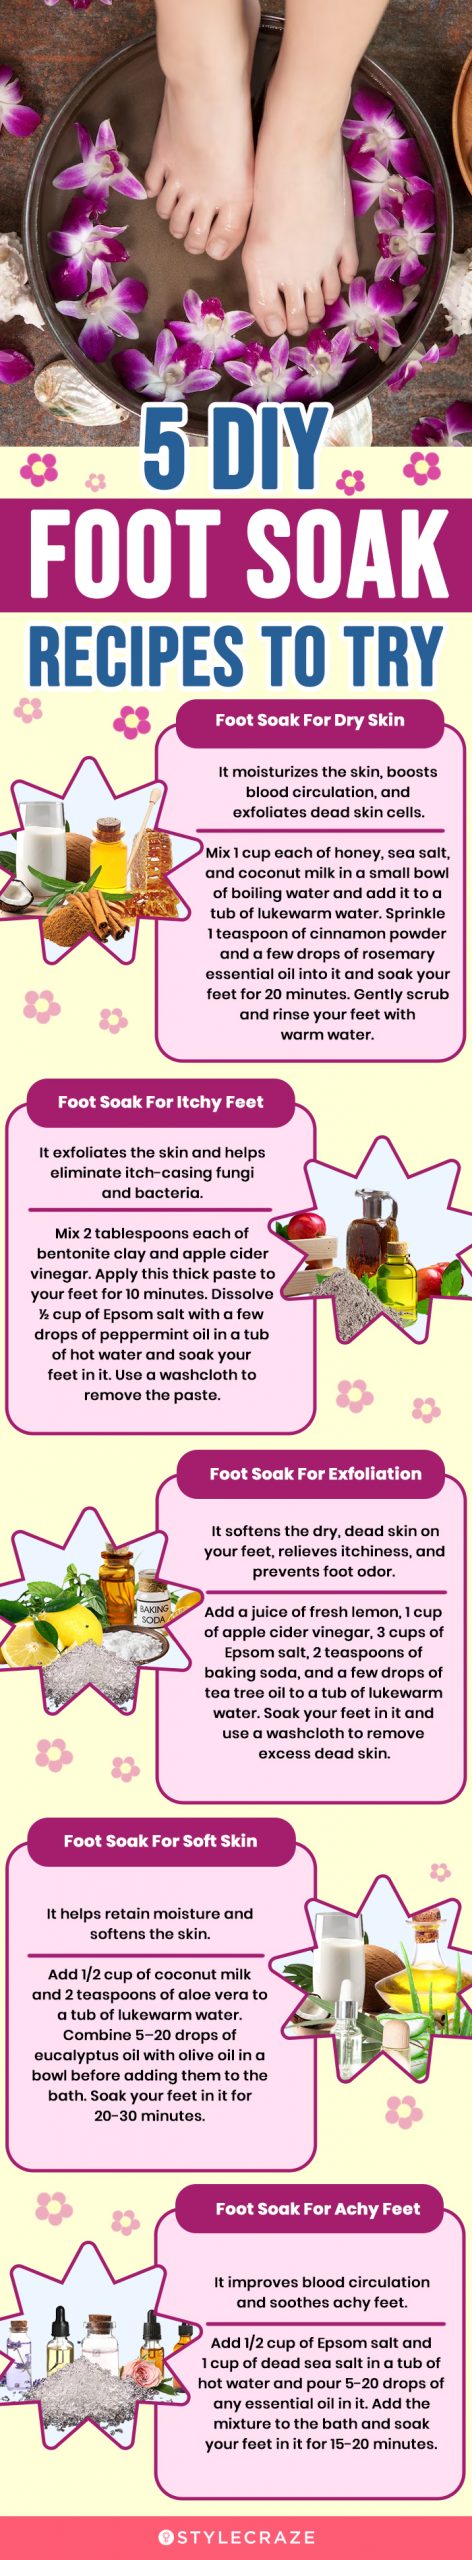 5 DIY Foot Soaks for Tired Feet – Herb & Root